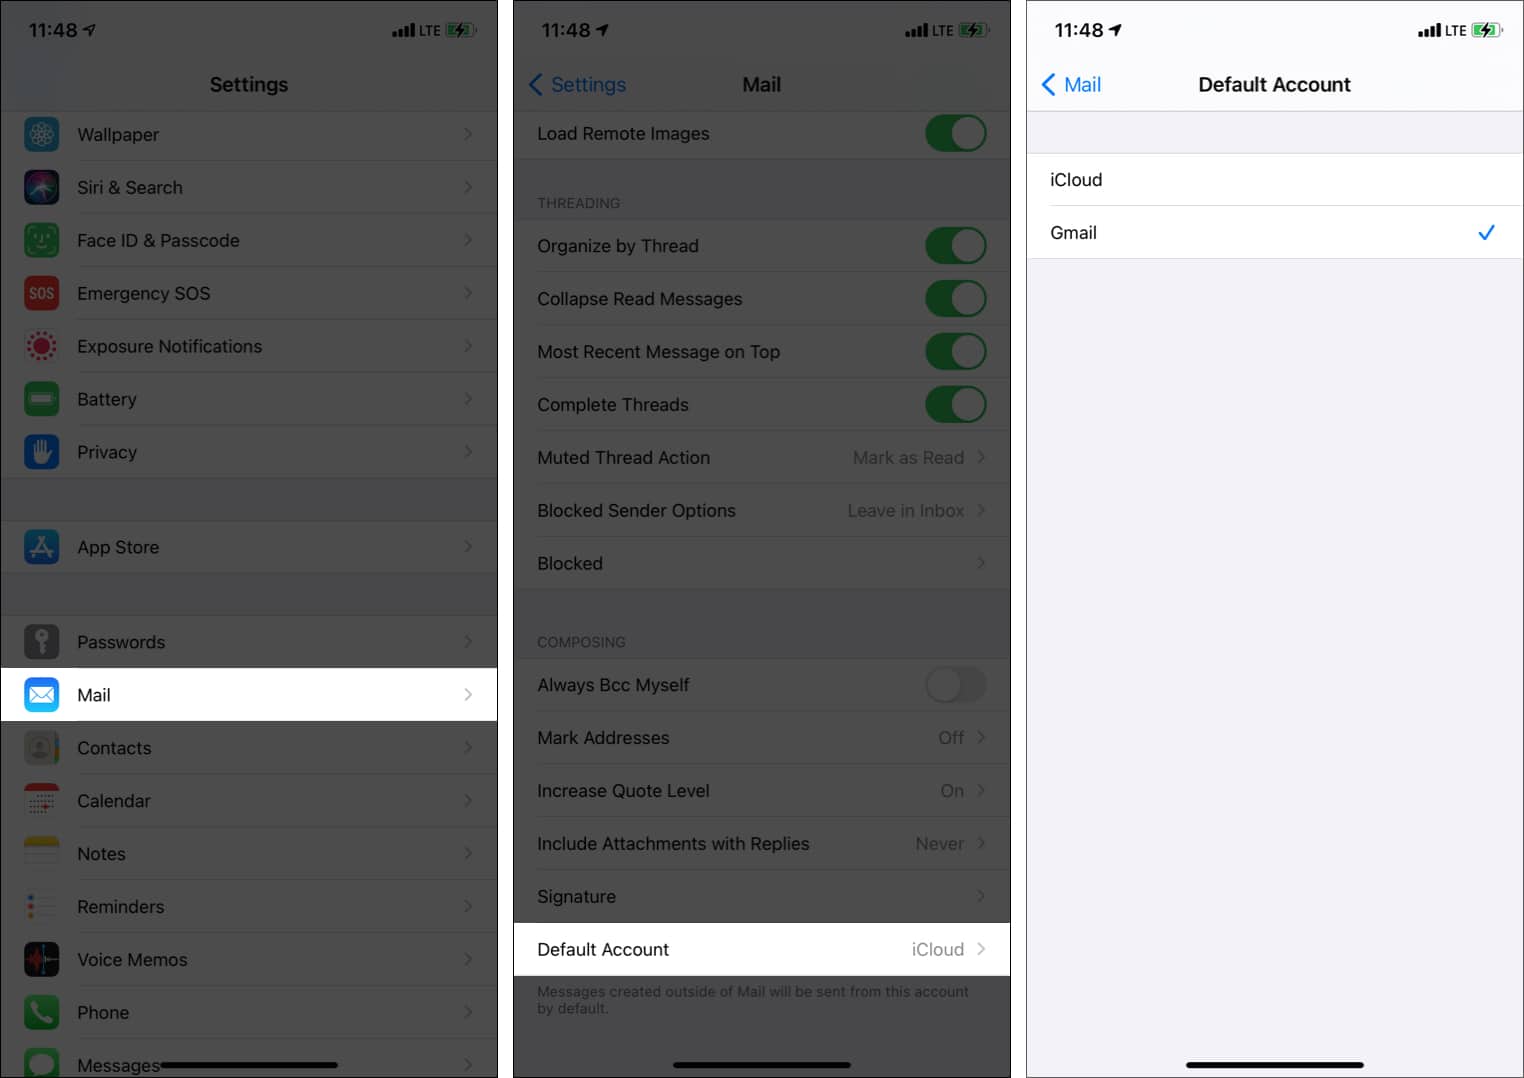 How to change default email on iPhone and iPad